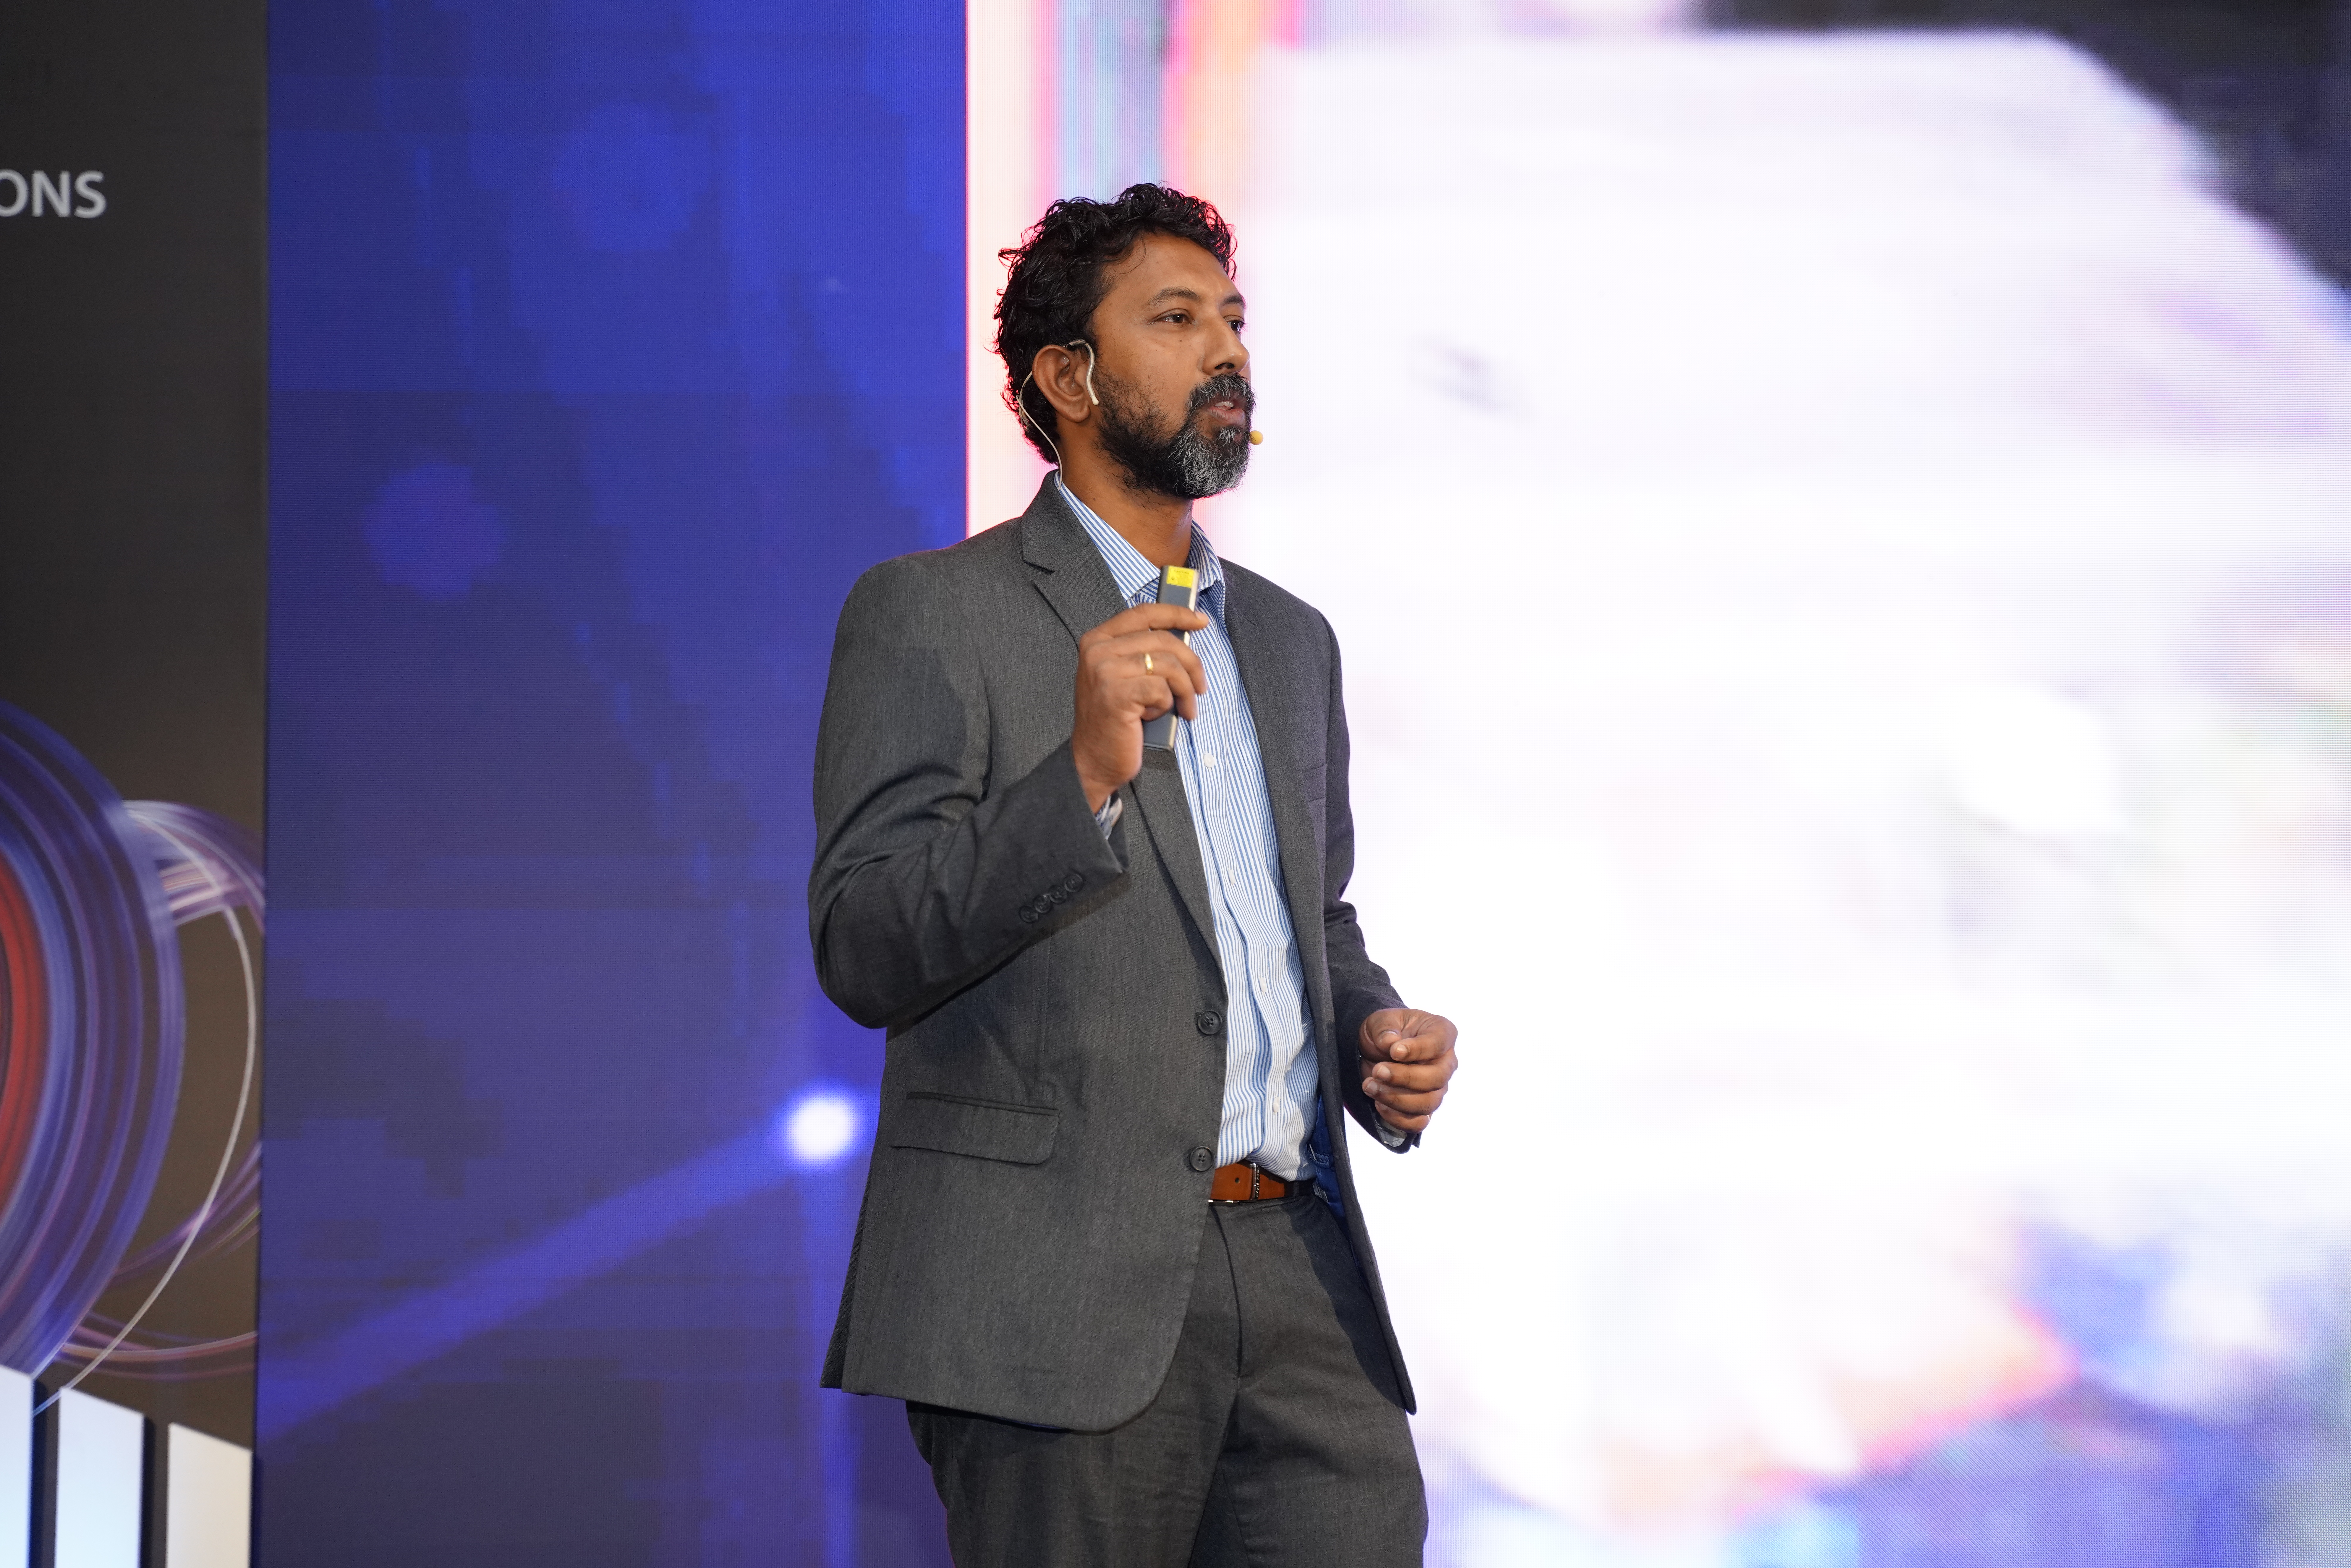 Abhilash Tomy as a motivational speaker for a corporate event in Bangalore